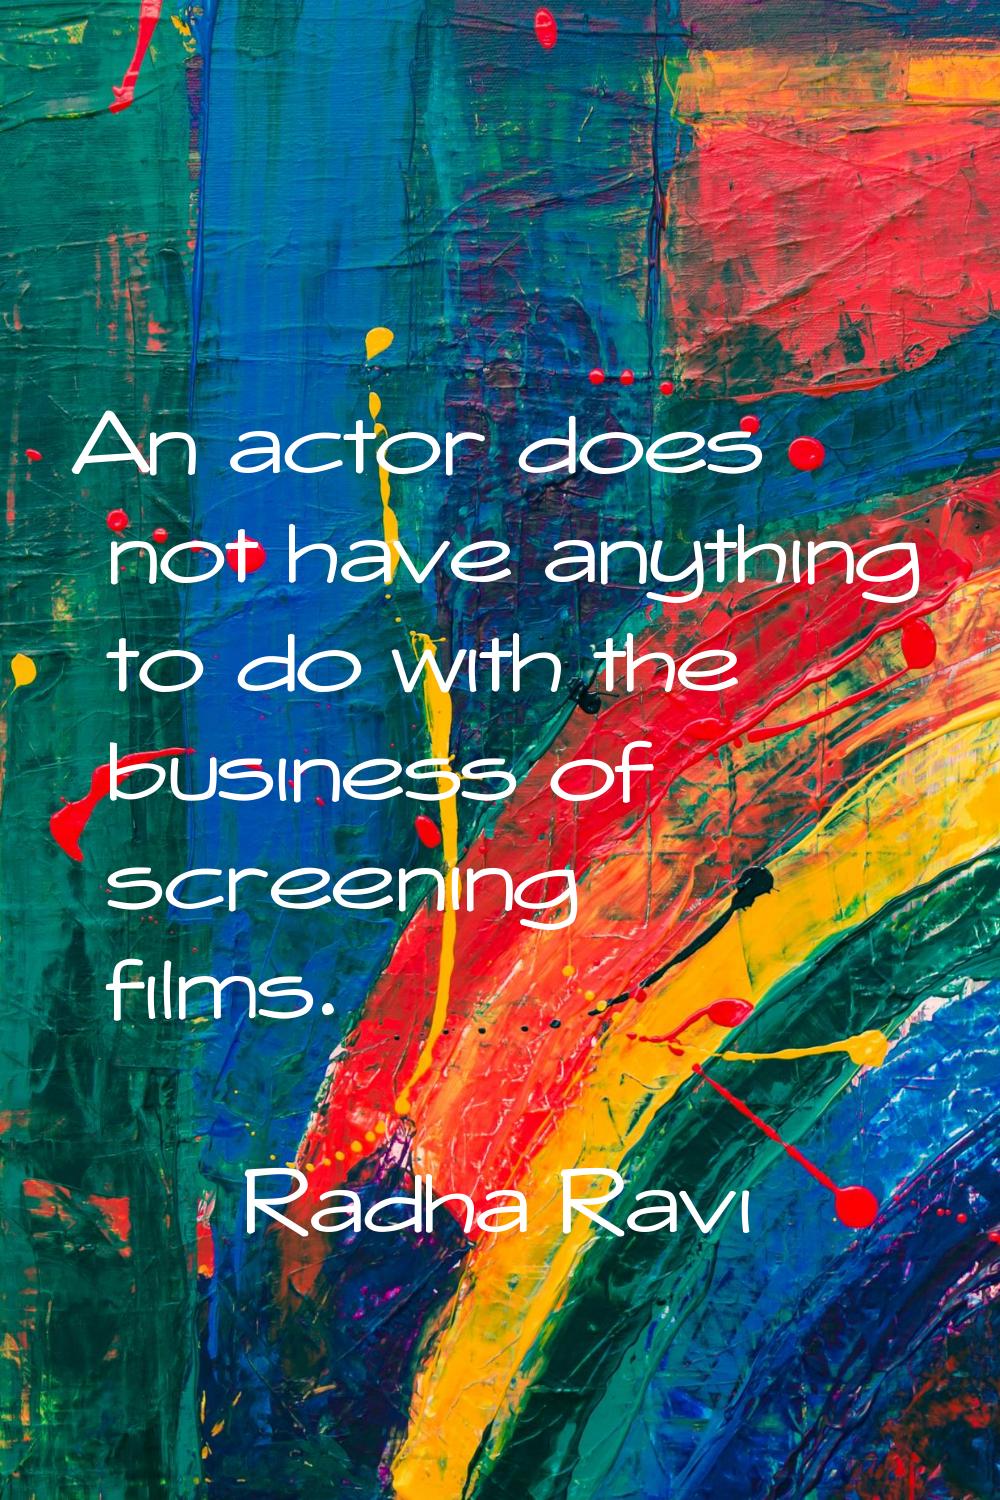 An actor does not have anything to do with the business of screening films.